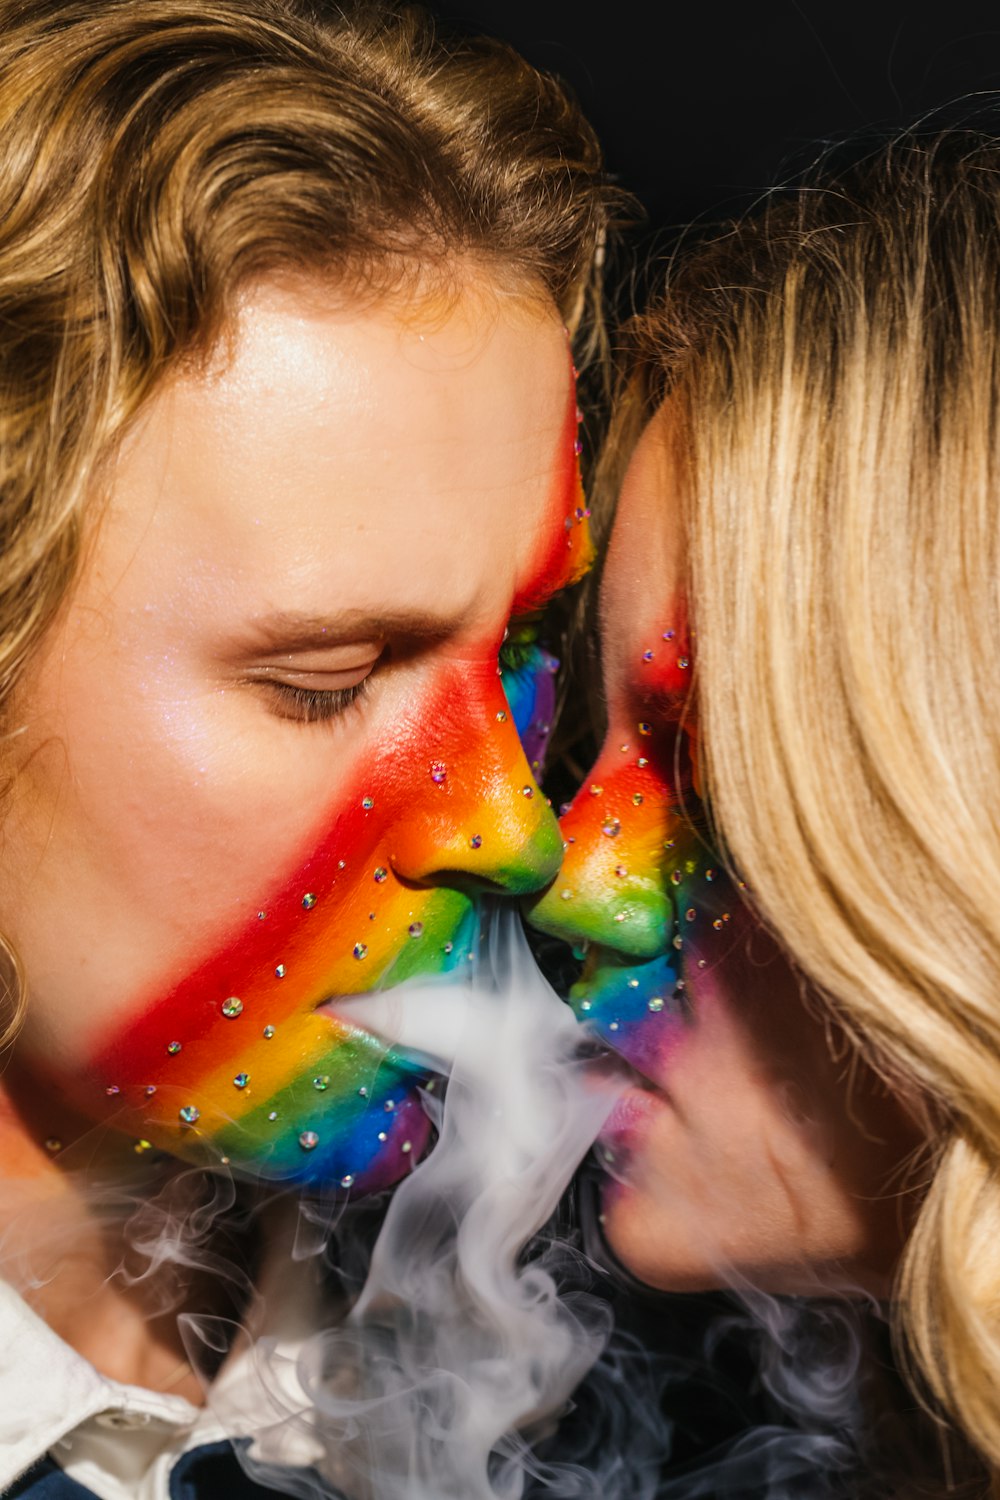 a person kissing another woman